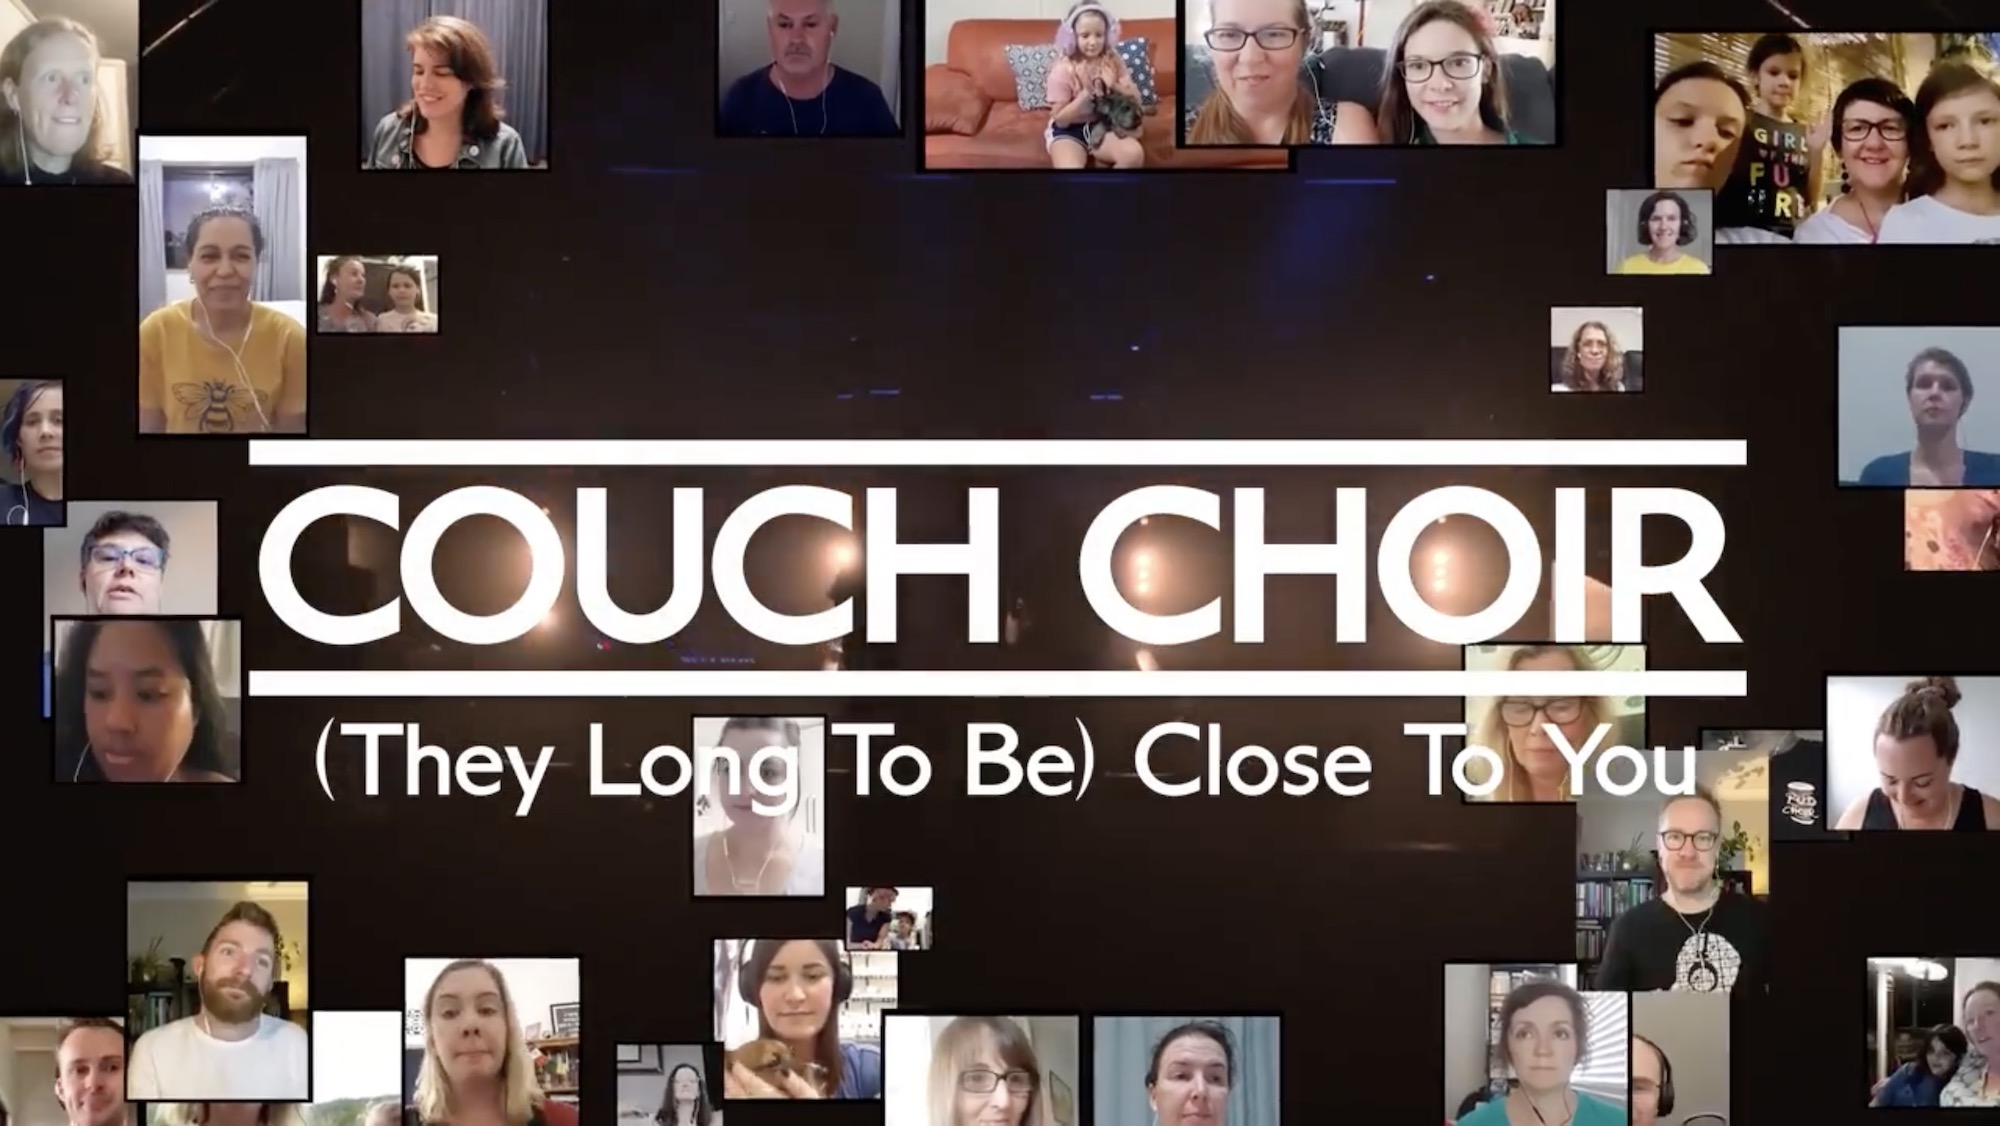 Couch Choir (They Long to Be) Close to You